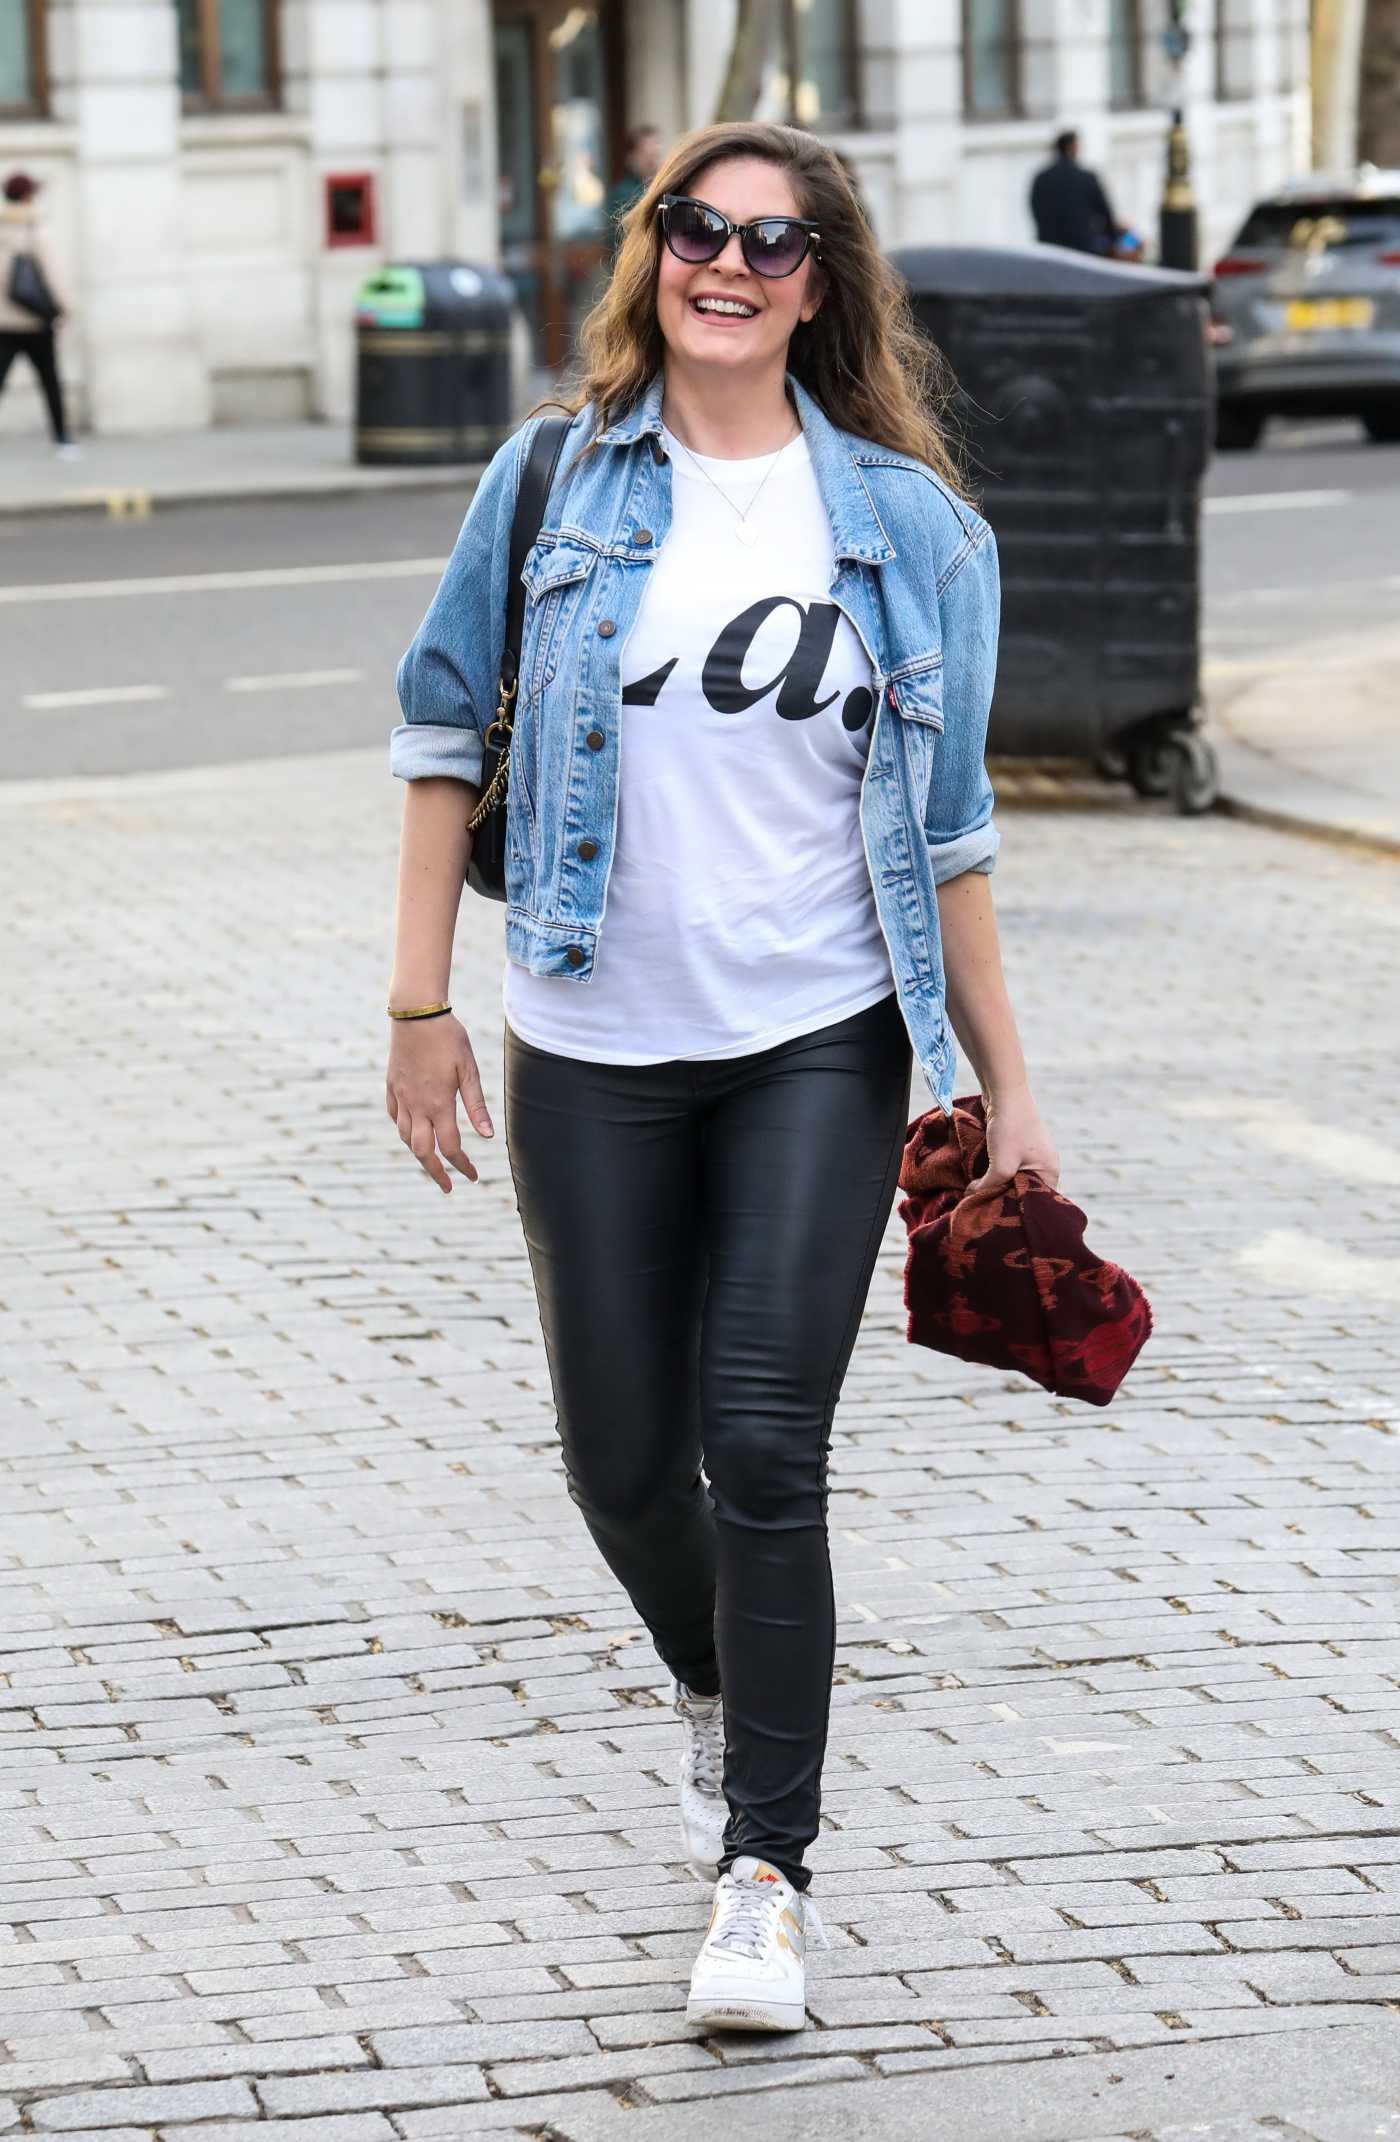 Lucy Horobin in a Blue Denim Jacket Arrives at the Global Radio Studios in London 02/23/2021